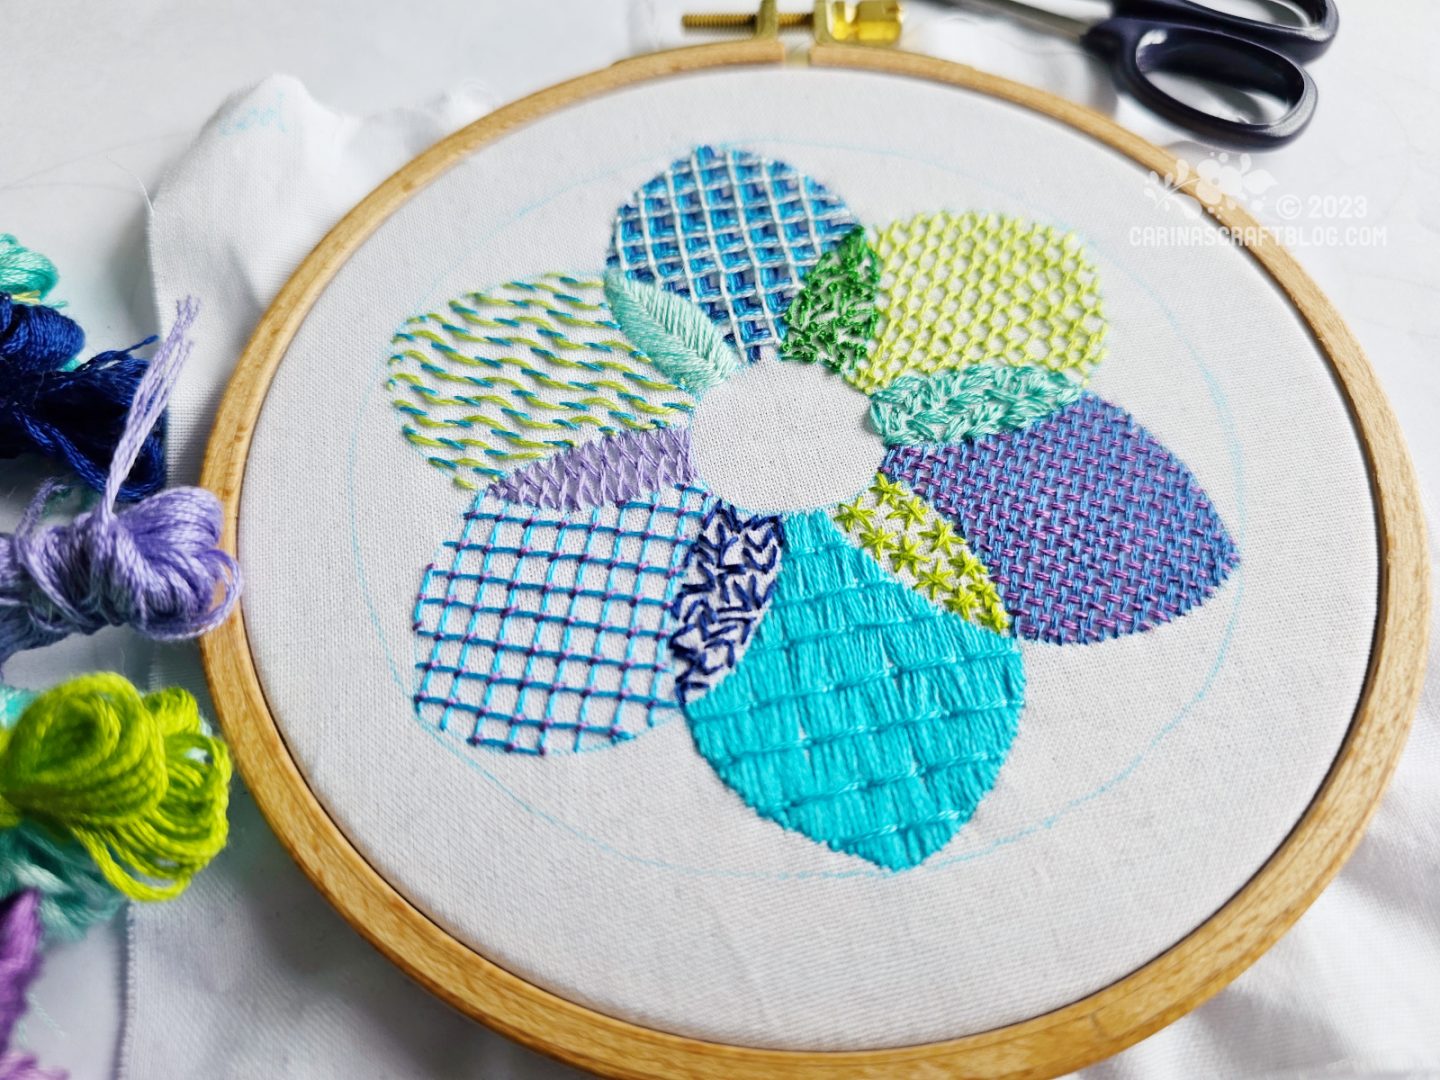 A wooden embroidery hoop with white fabric. On the fabric is embroidered a flower shaped design in cool colours using 12 different stitches.